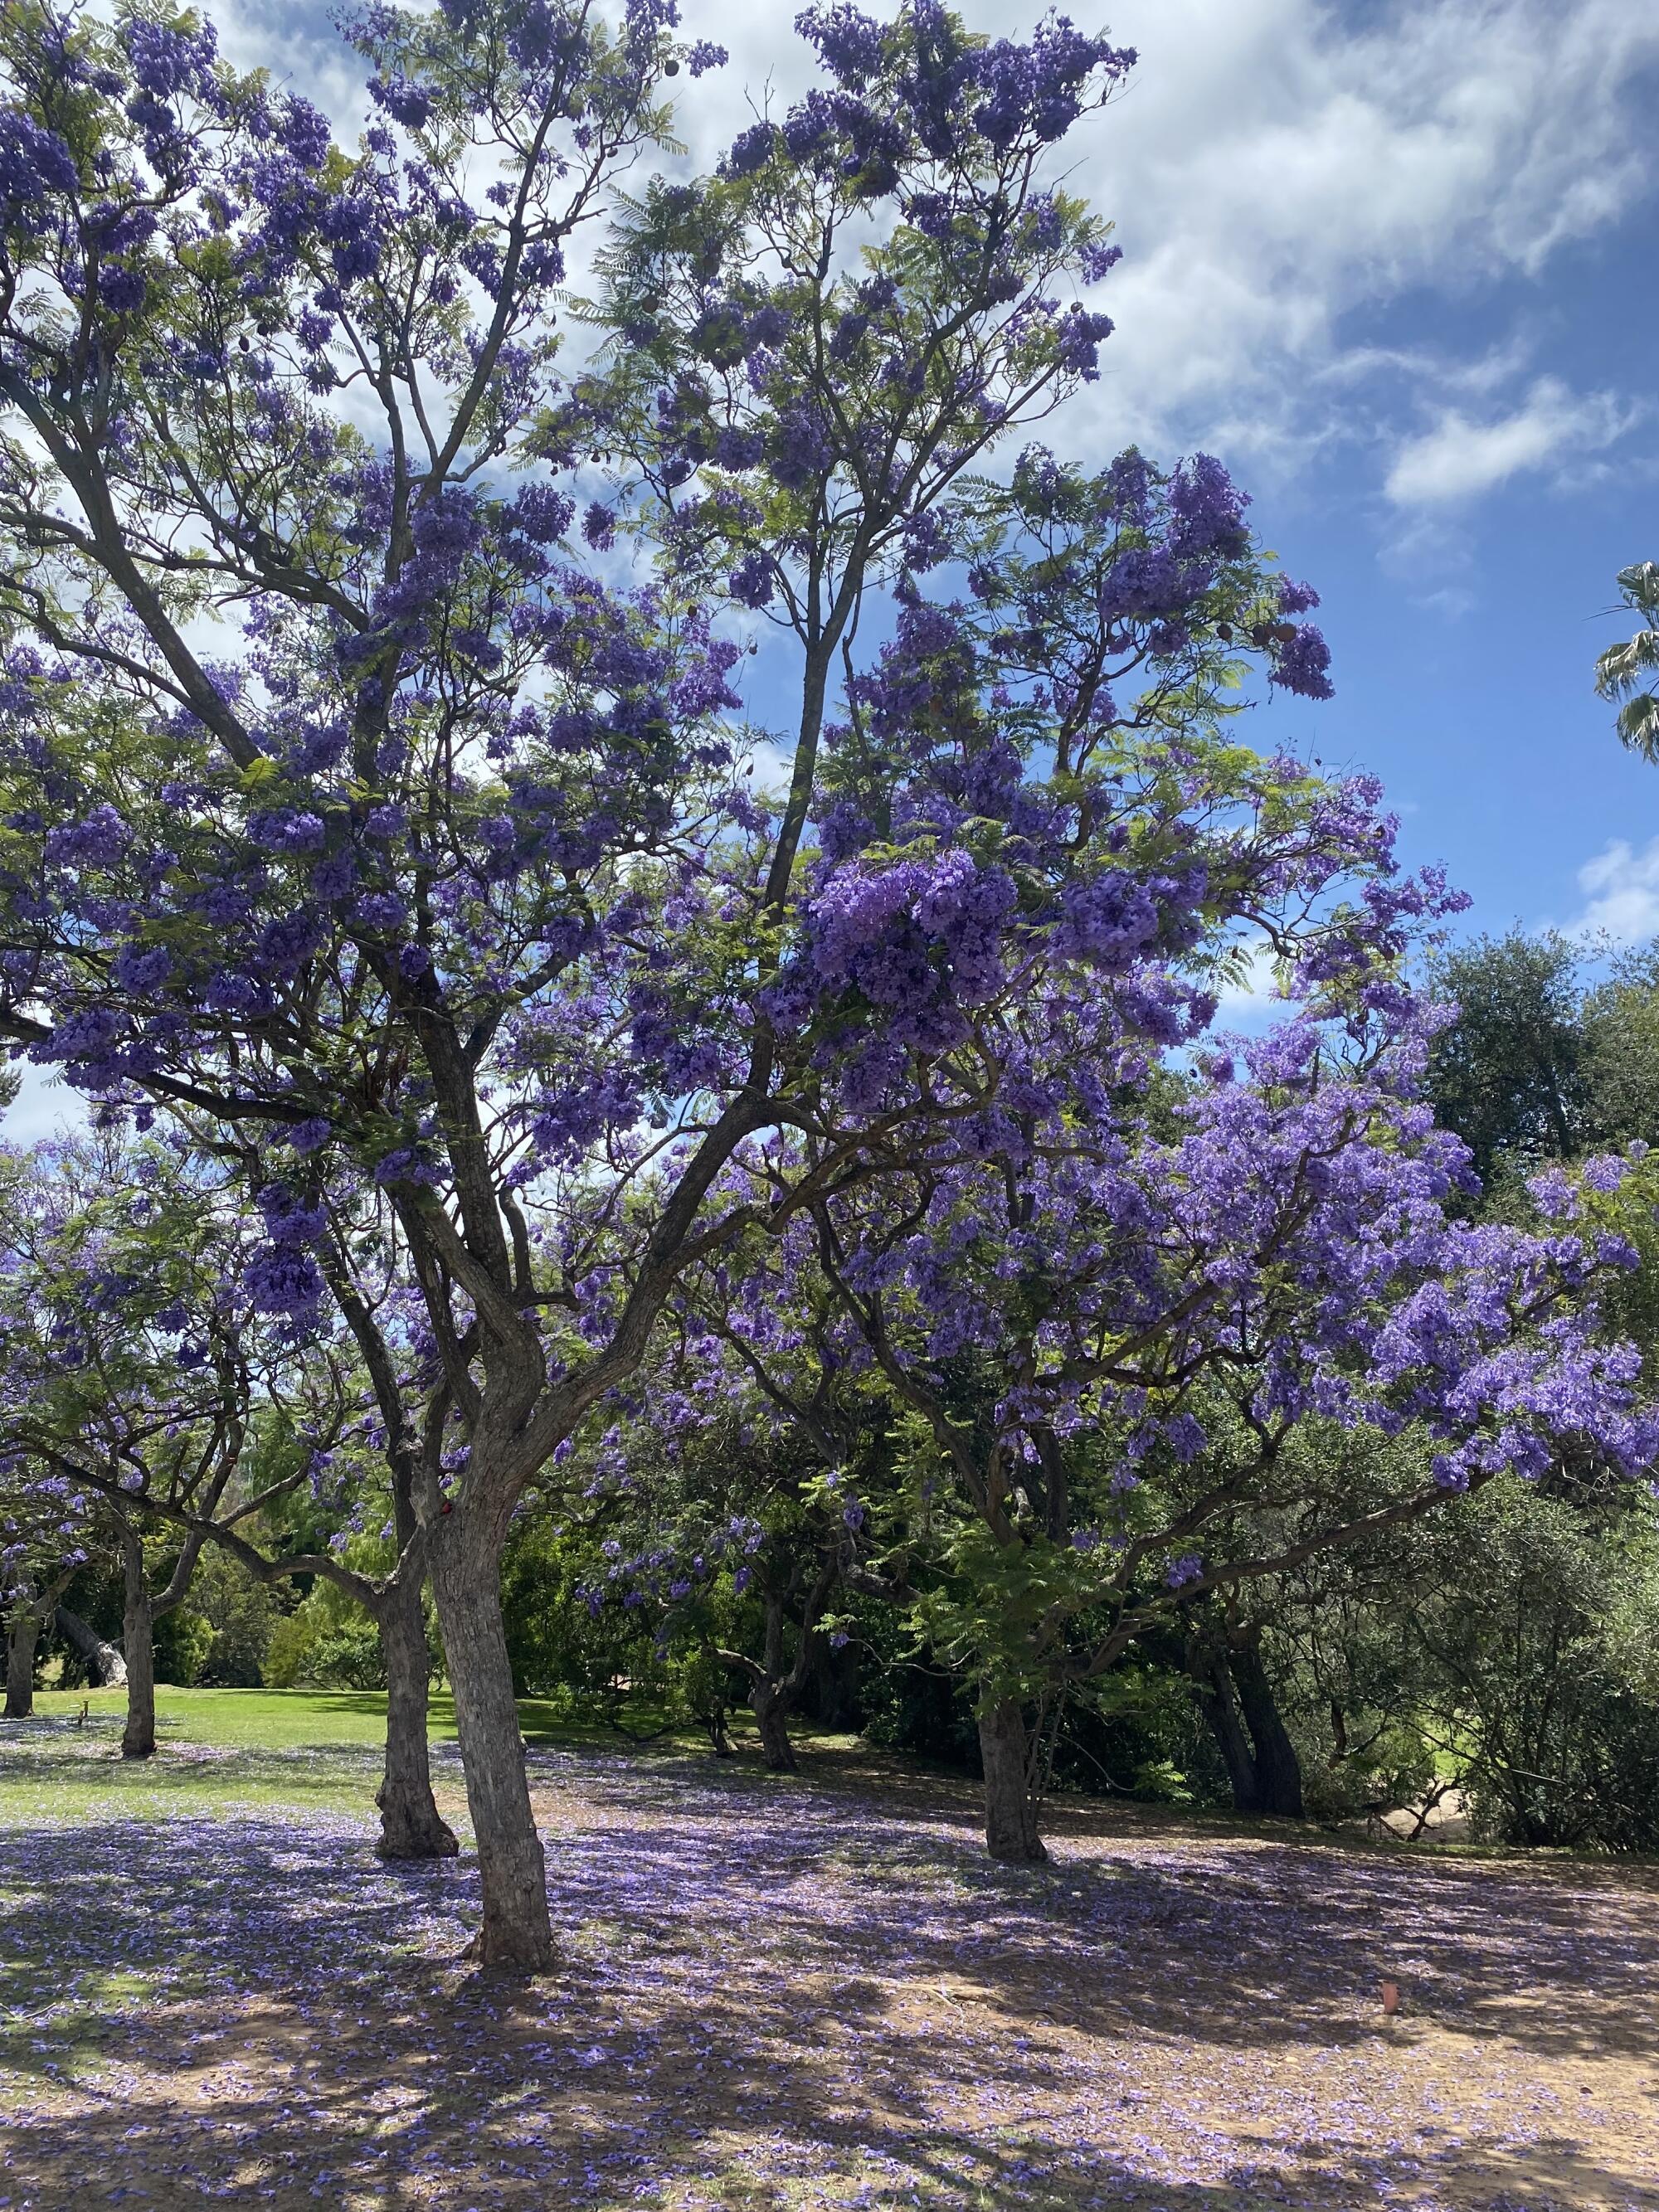 A blooming jacaranda tree's branches are filled with purple flowers that also blanket the ground beneath it.